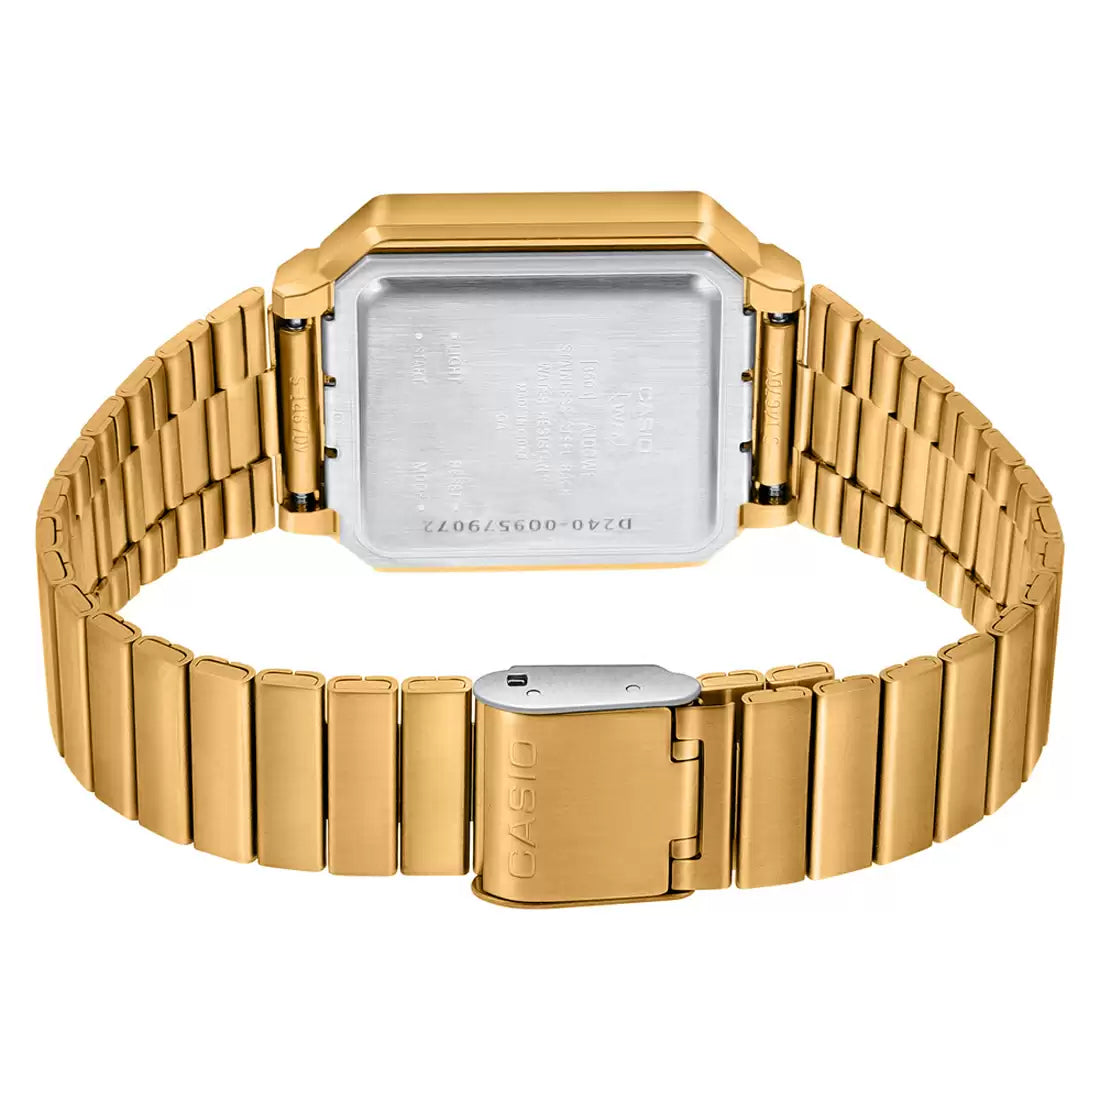 Vintage Unisex Gold Stainless Steel